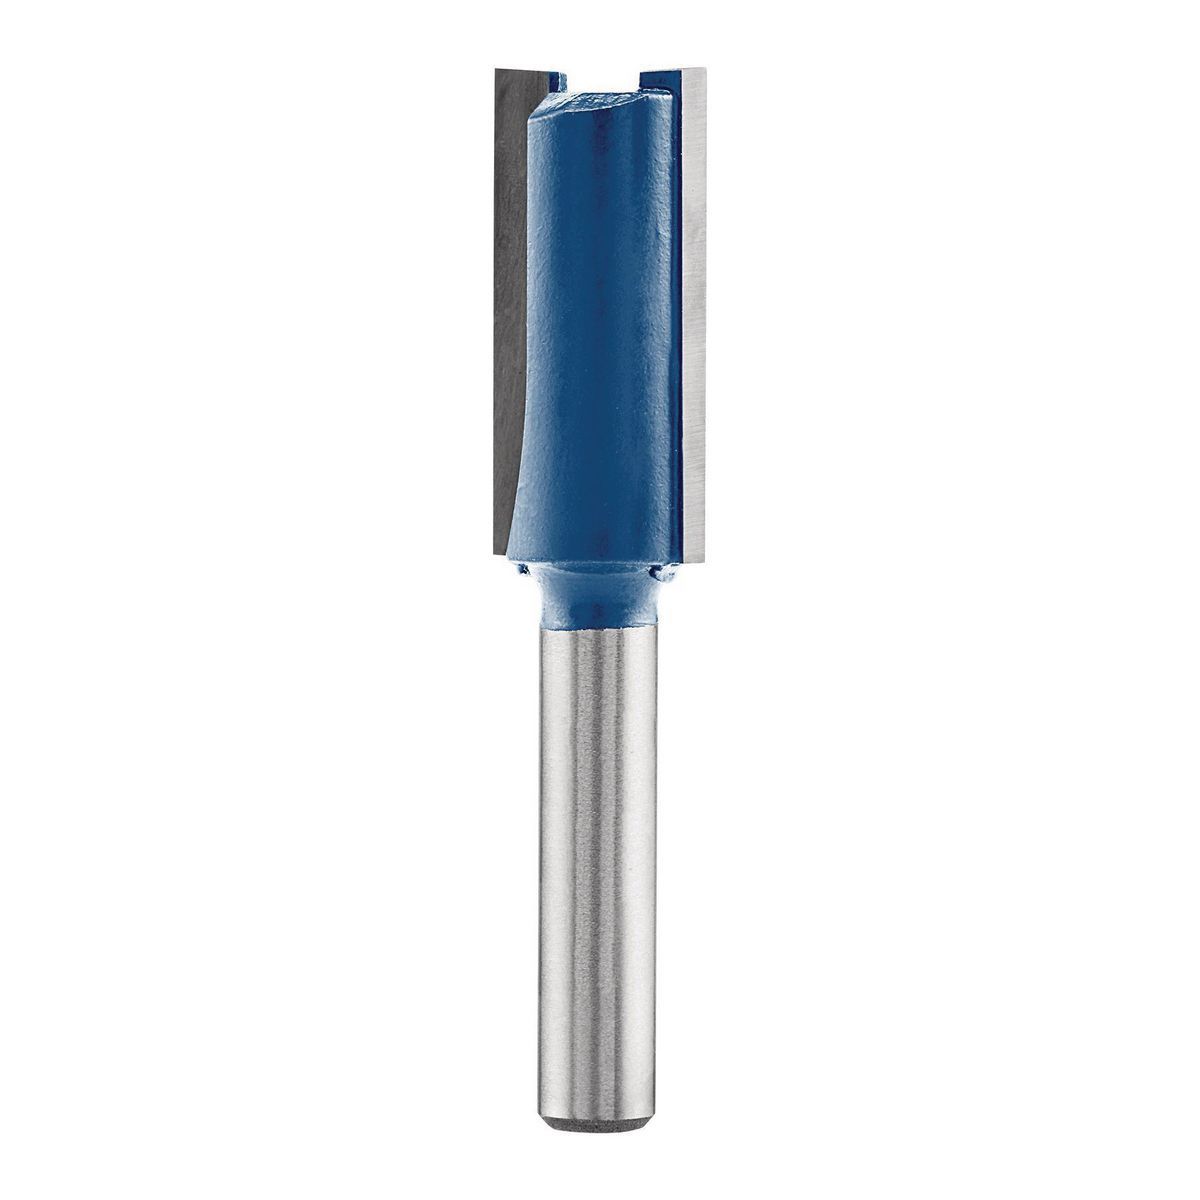 HERCULES 2 Flute, 1/2 in. x 1 in. Straight Router Bit with 1/4 in. Shank